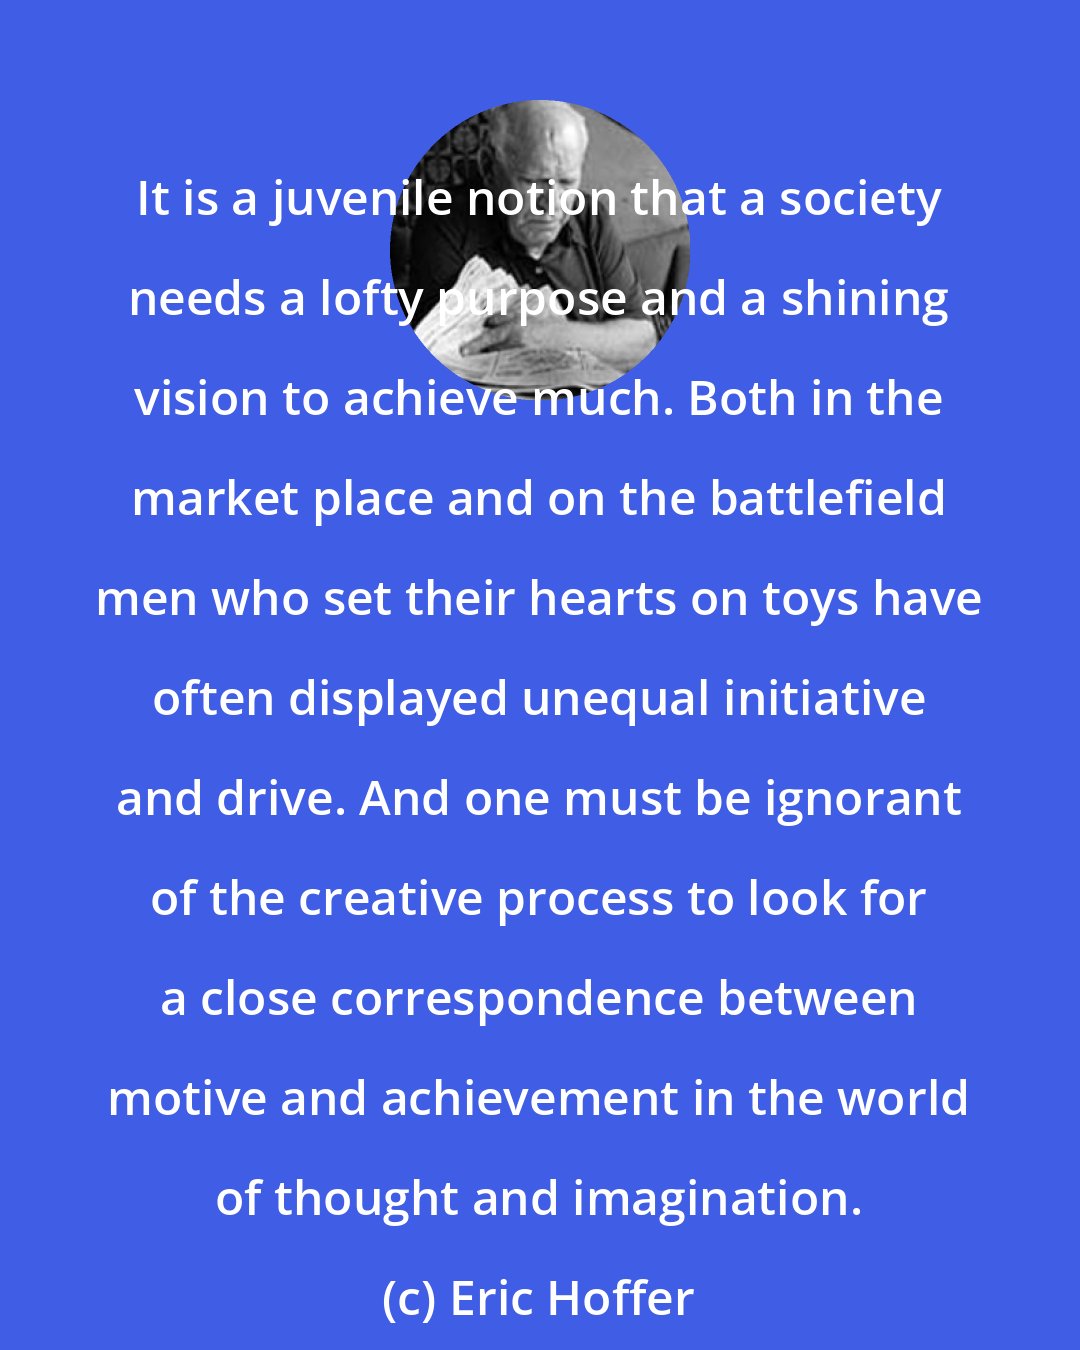 Eric Hoffer: It is a juvenile notion that a society needs a lofty purpose and a shining vision to achieve much. Both in the market place and on the battlefield men who set their hearts on toys have often displayed unequal initiative and drive. And one must be ignorant of the creative process to look for a close correspondence between motive and achievement in the world of thought and imagination.